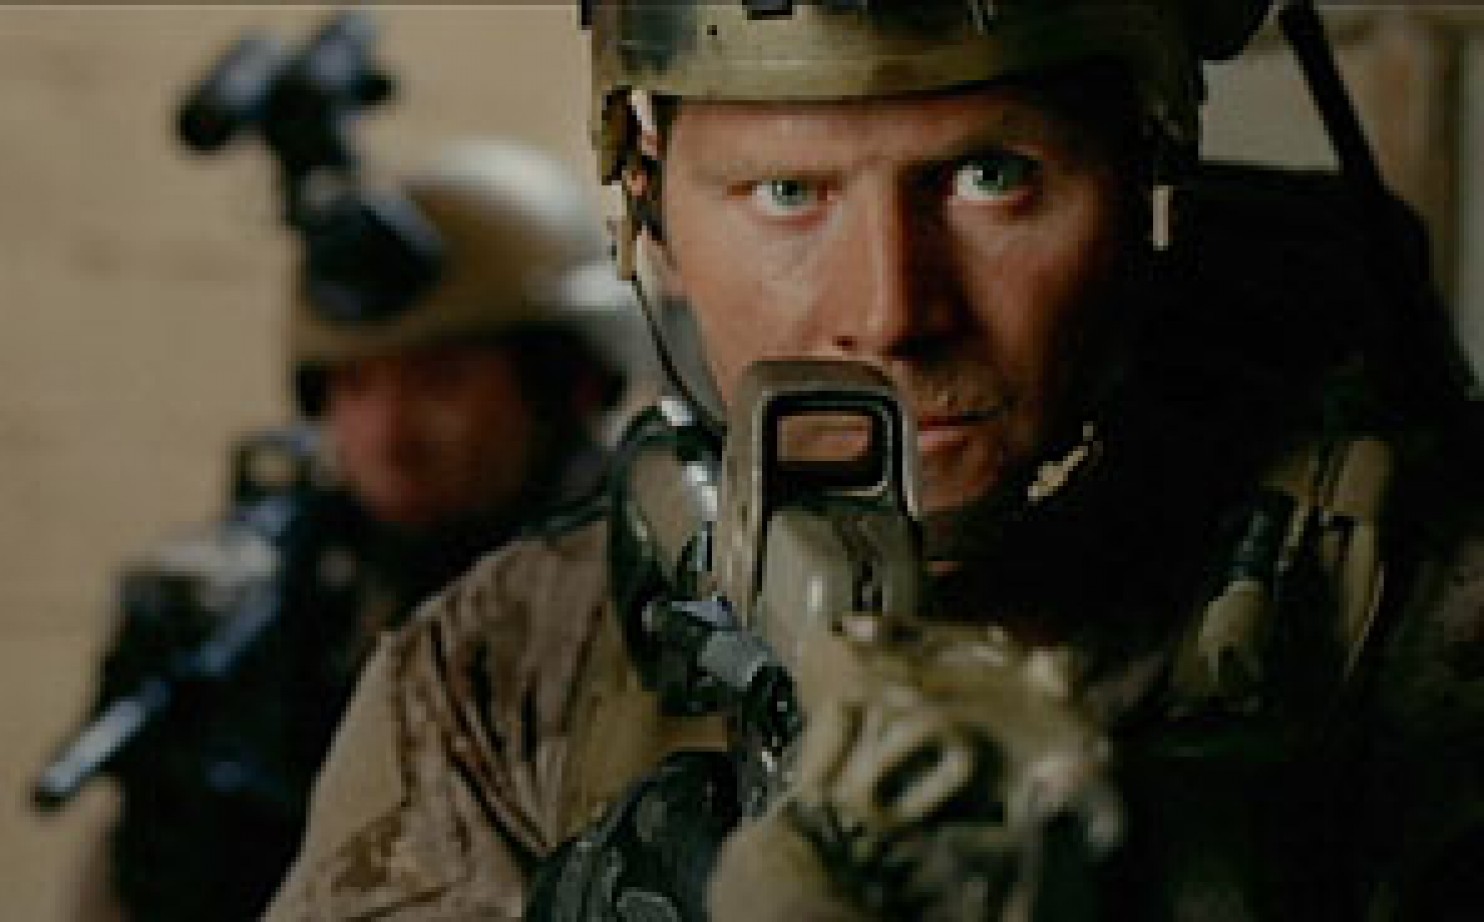 Amazing Act Of Valor Pictures & Backgrounds